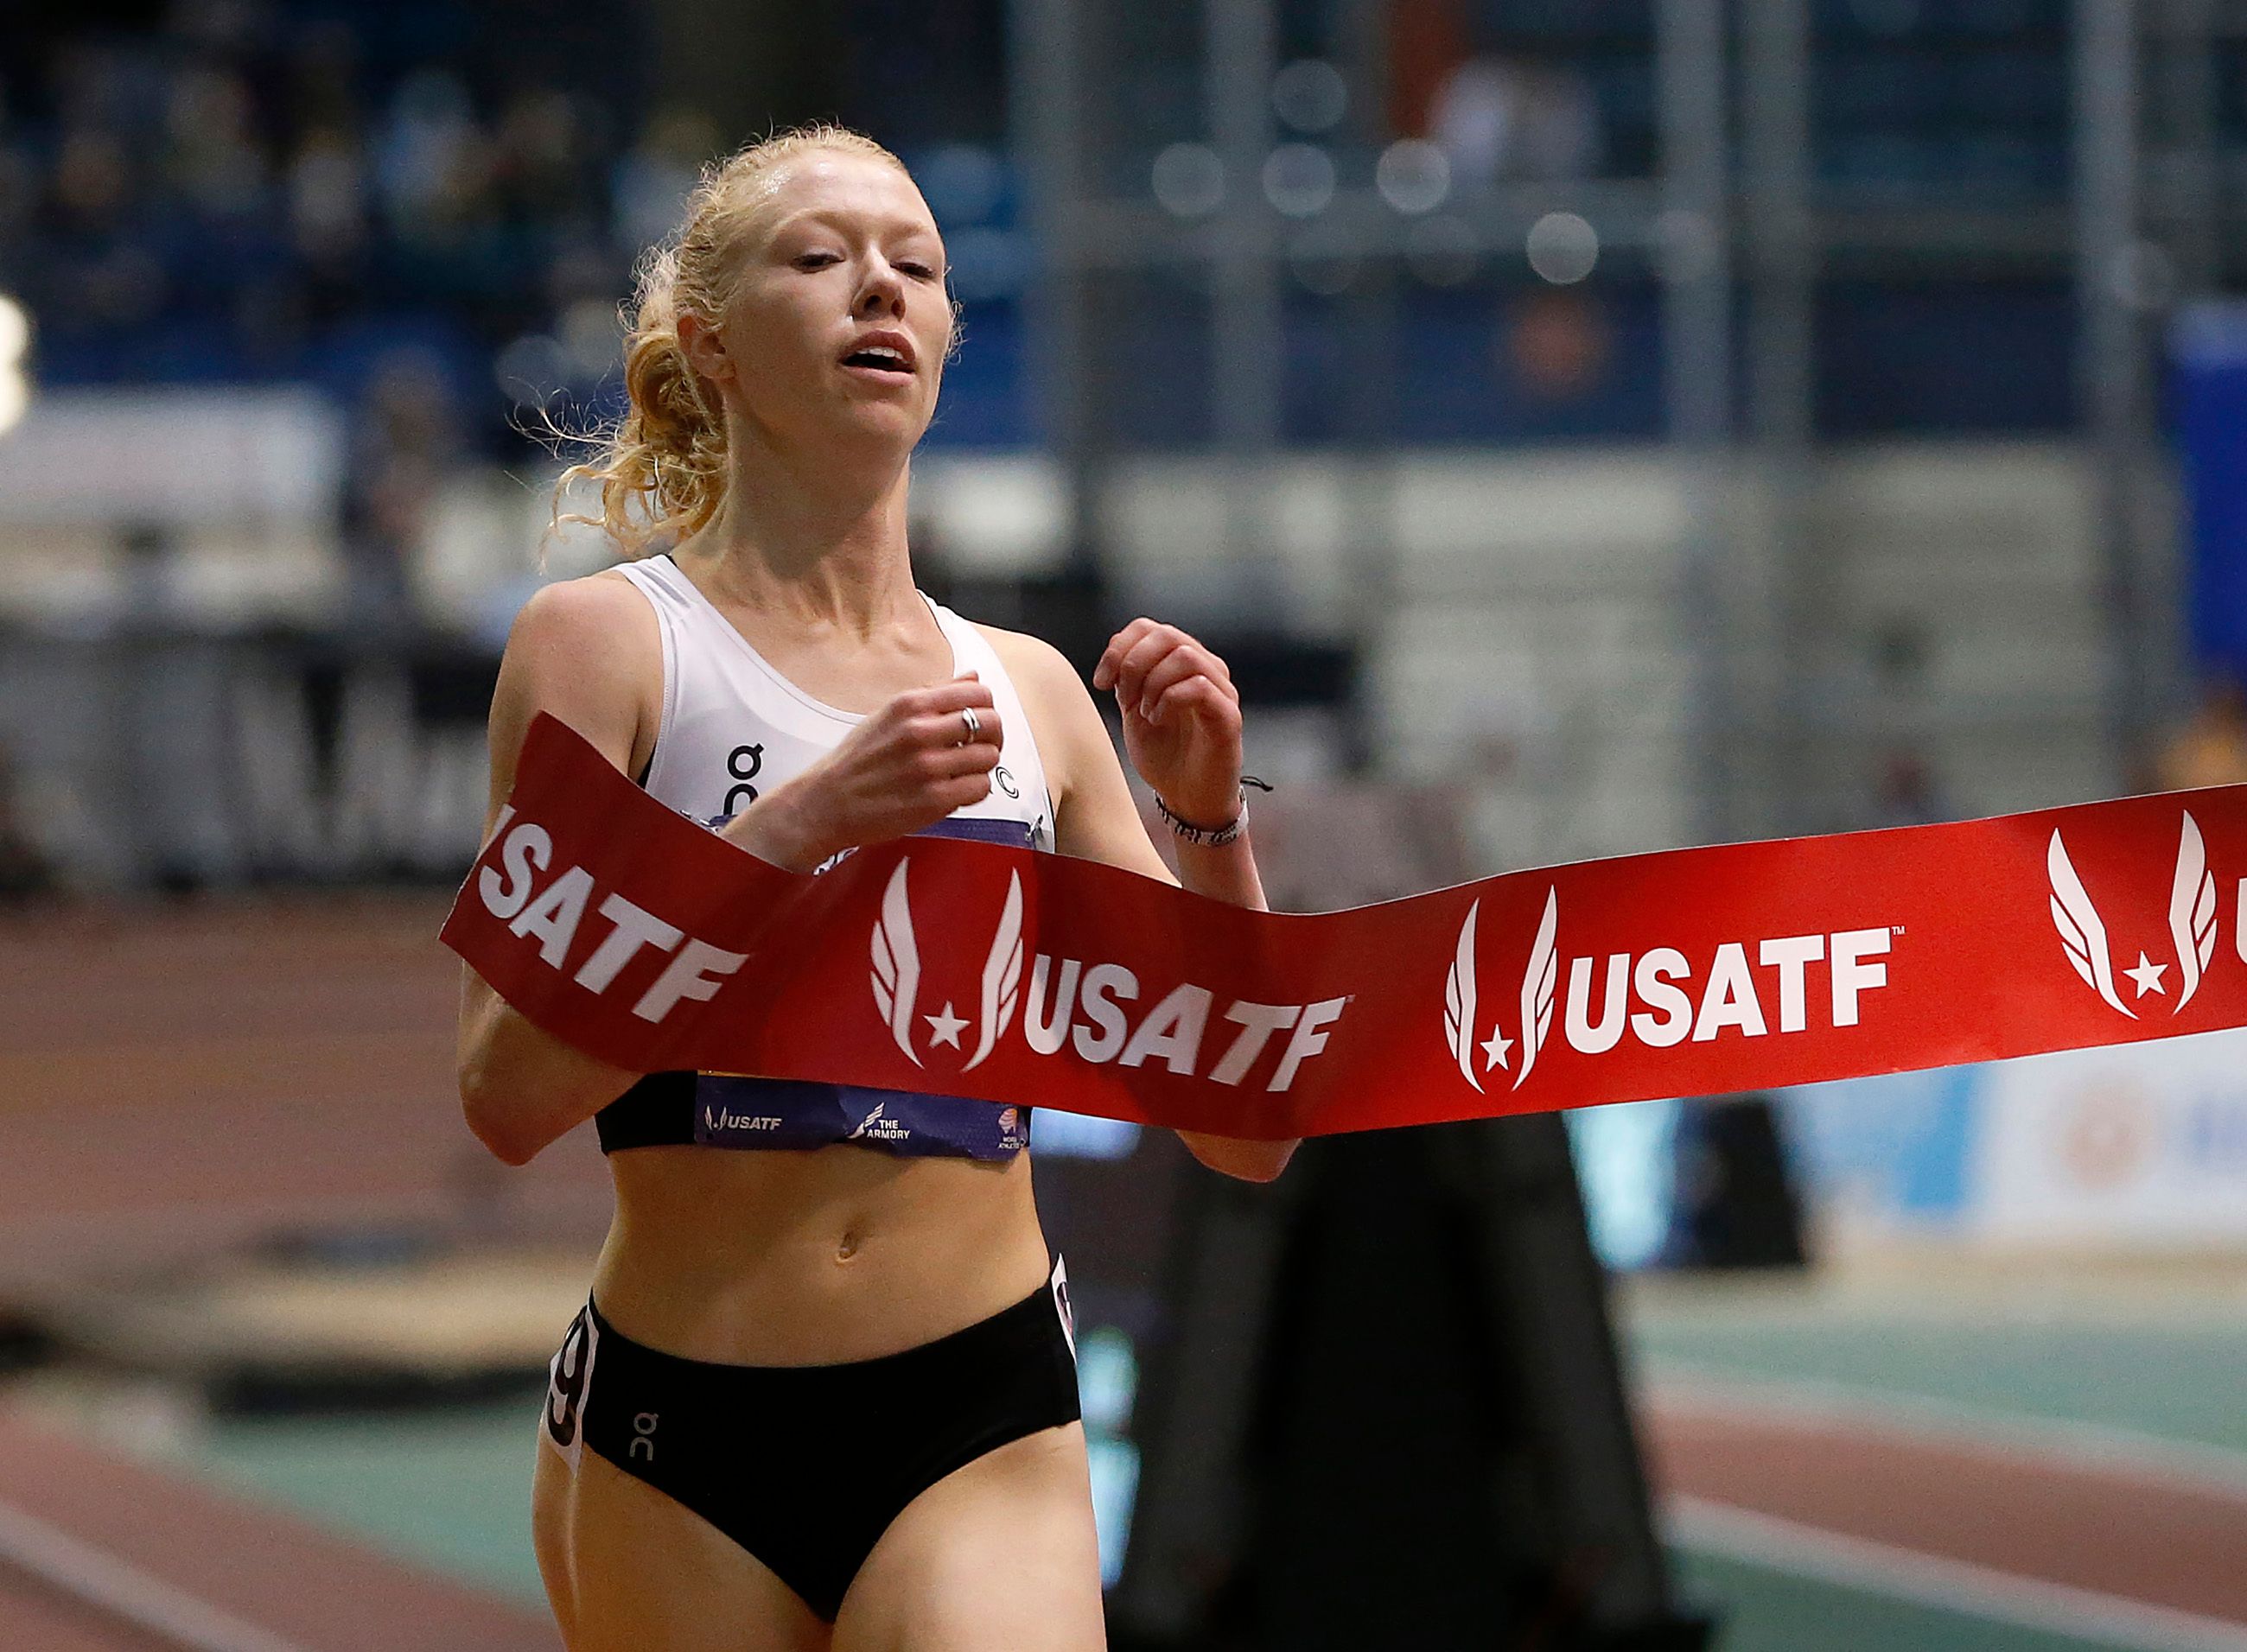 Alicia Monson wins the 3000m at the Millrose Games